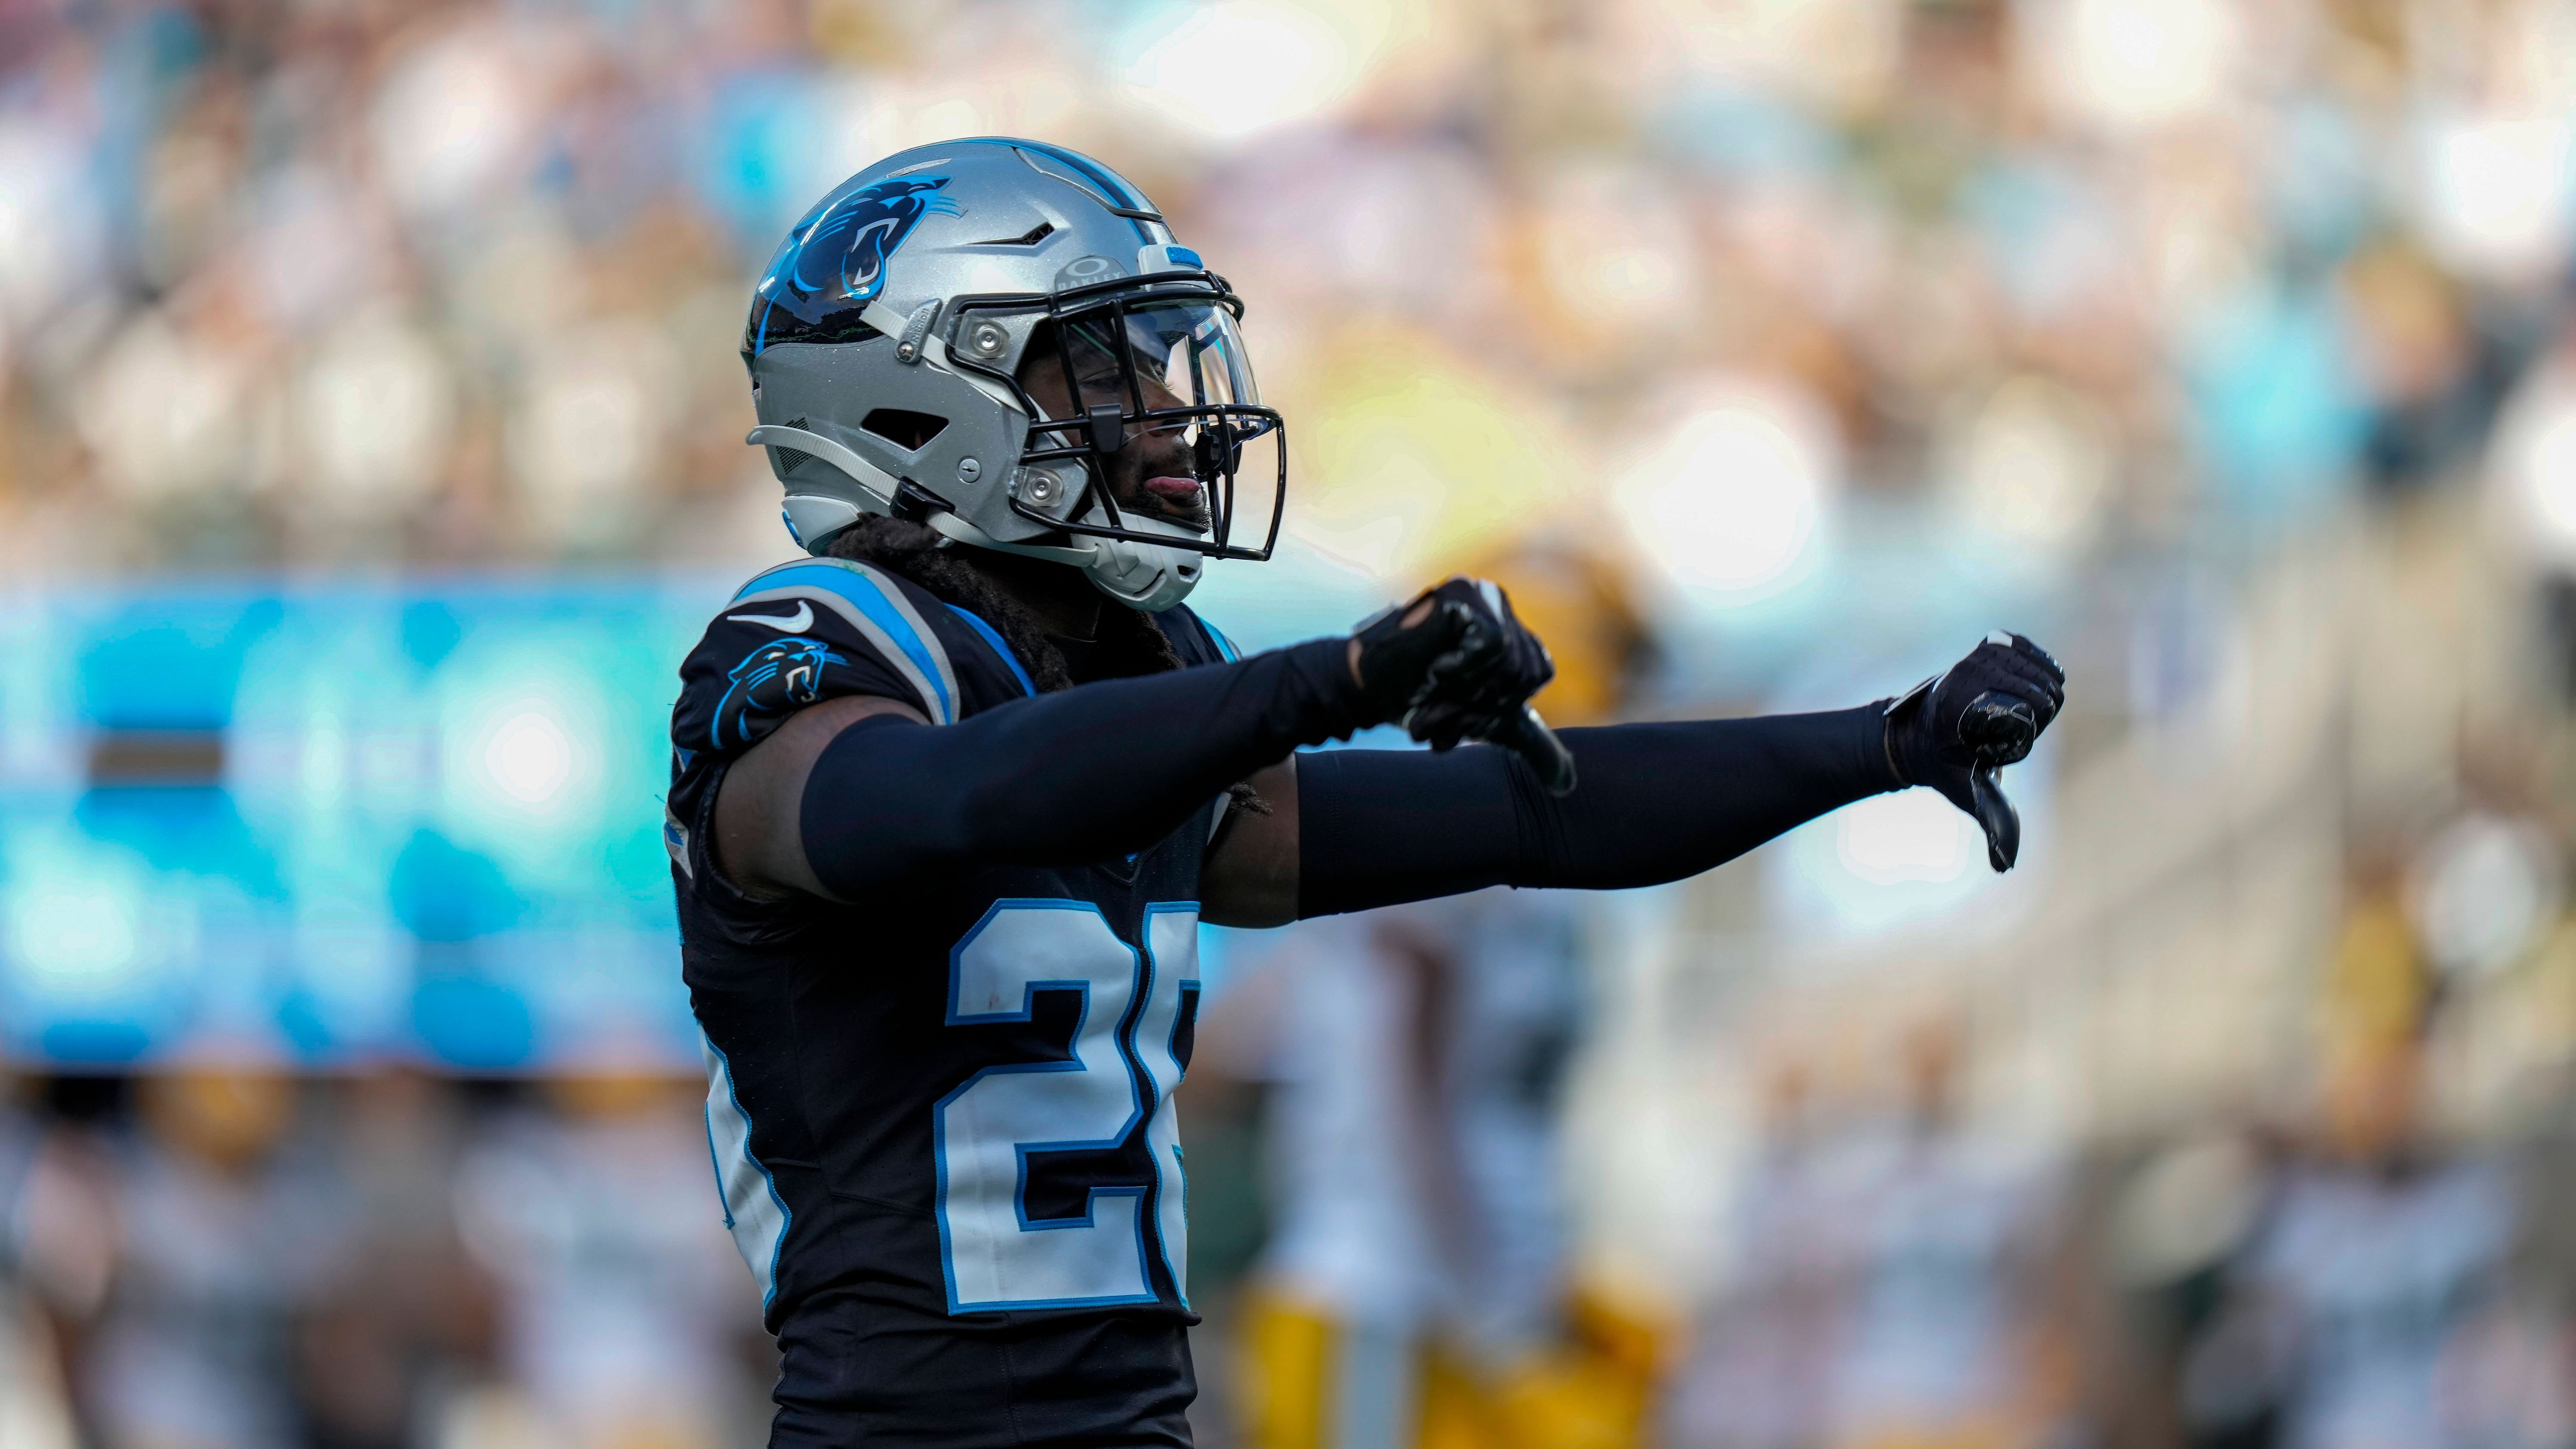 <strong>Carolina Panthers</strong><br>Bilanz: 29-53-1<br>Siegquote: 35.4%